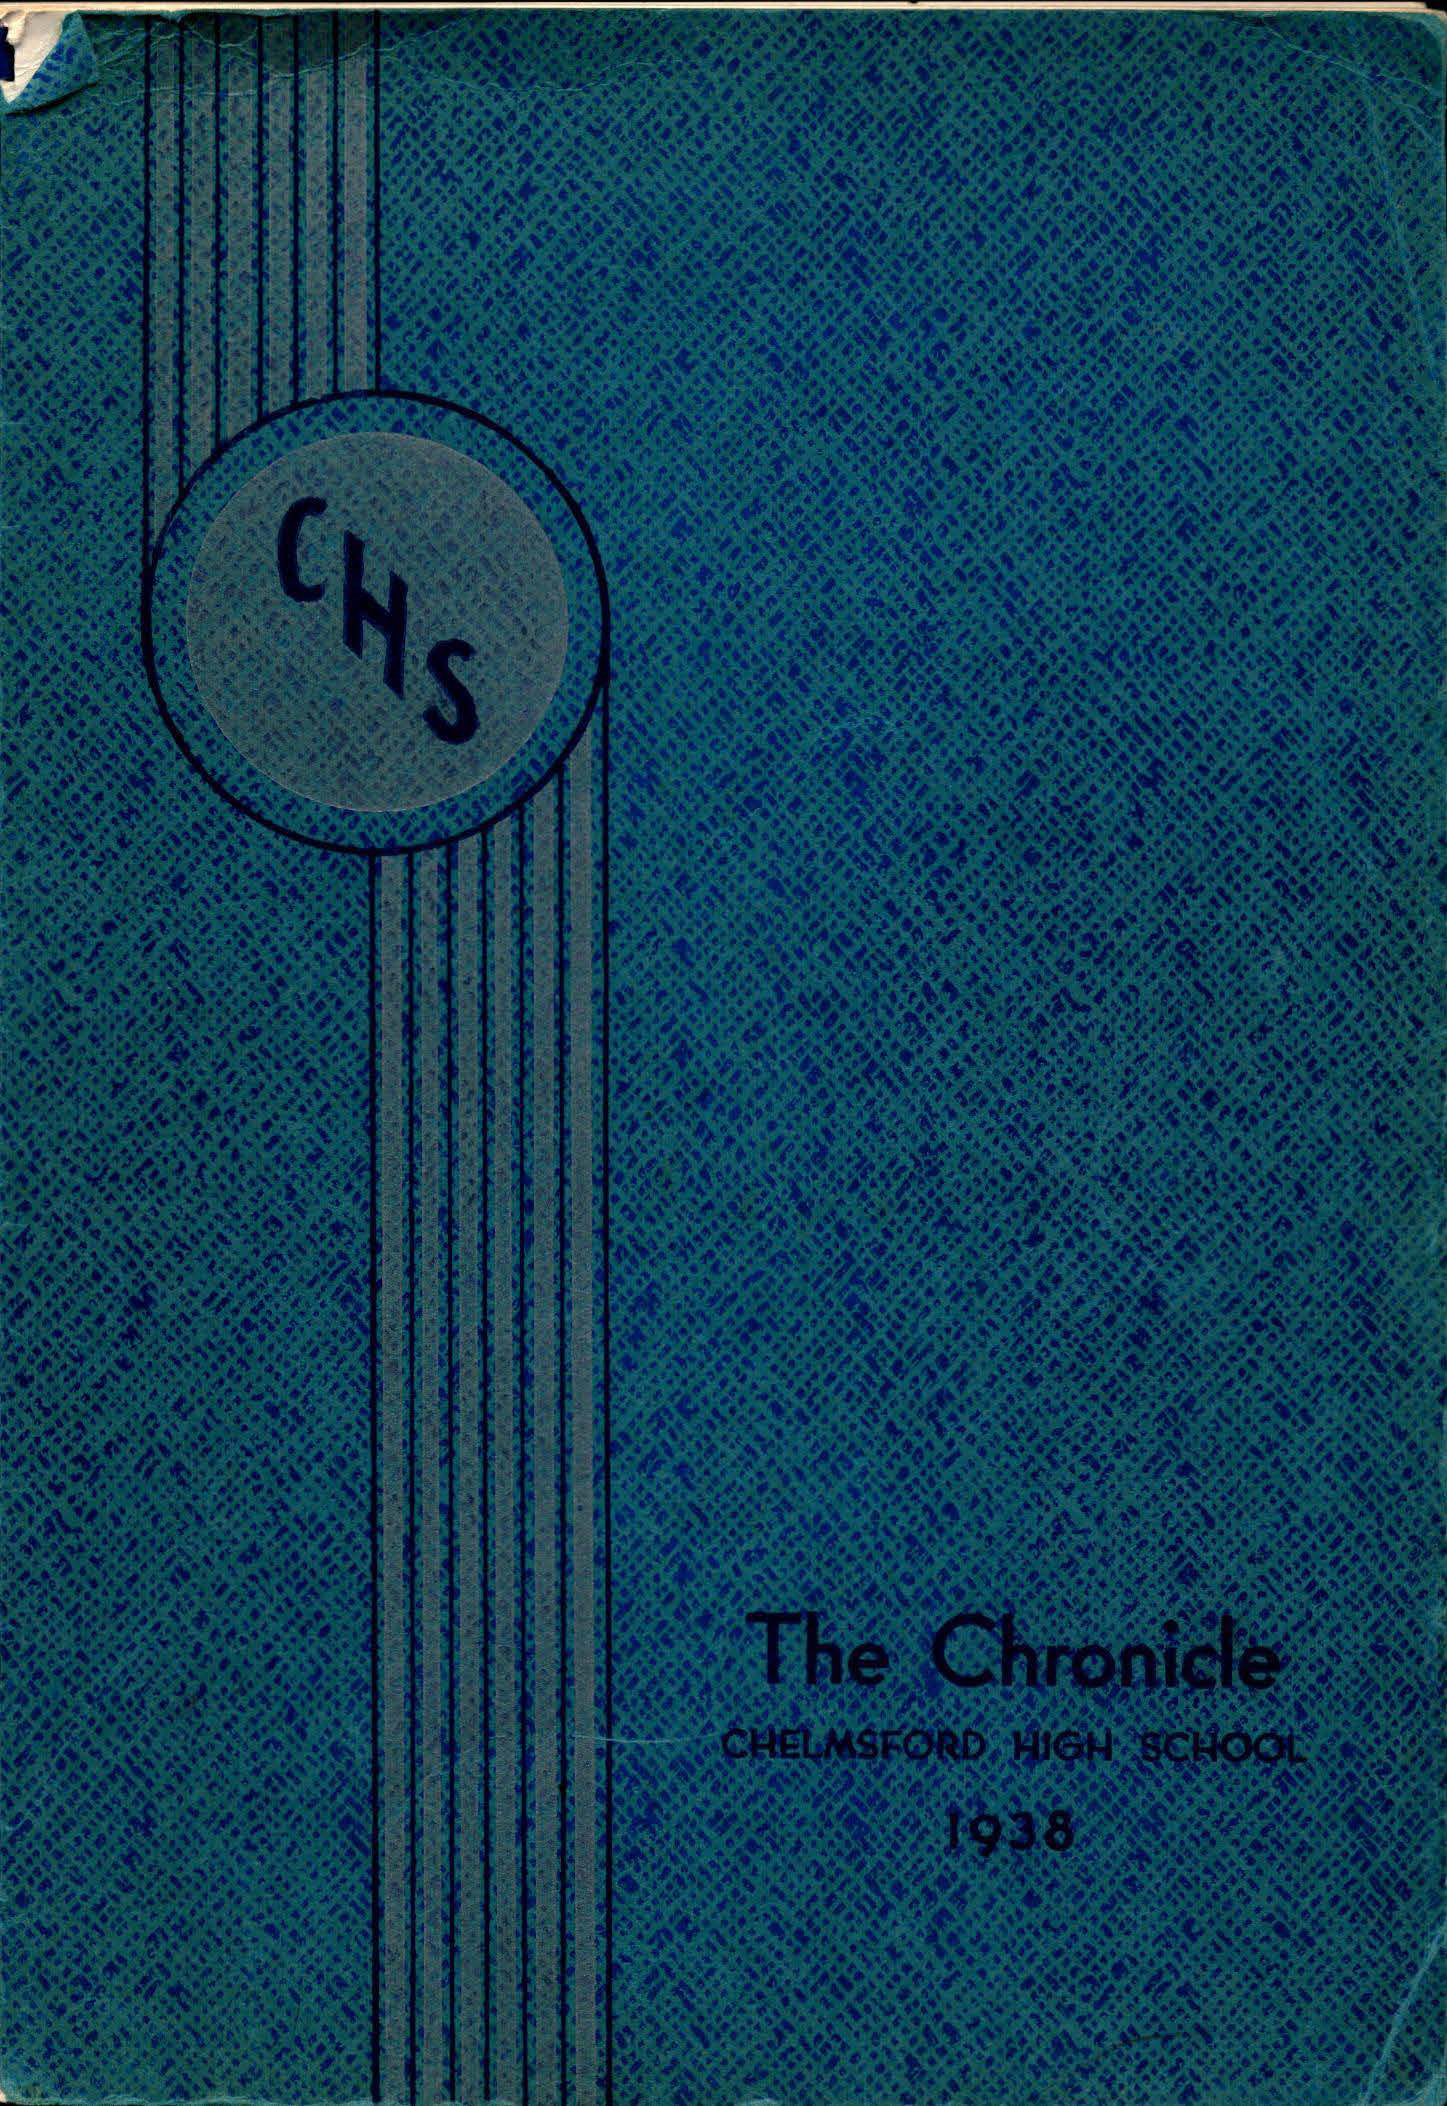 1938 Chelmsford High Yearbook 1